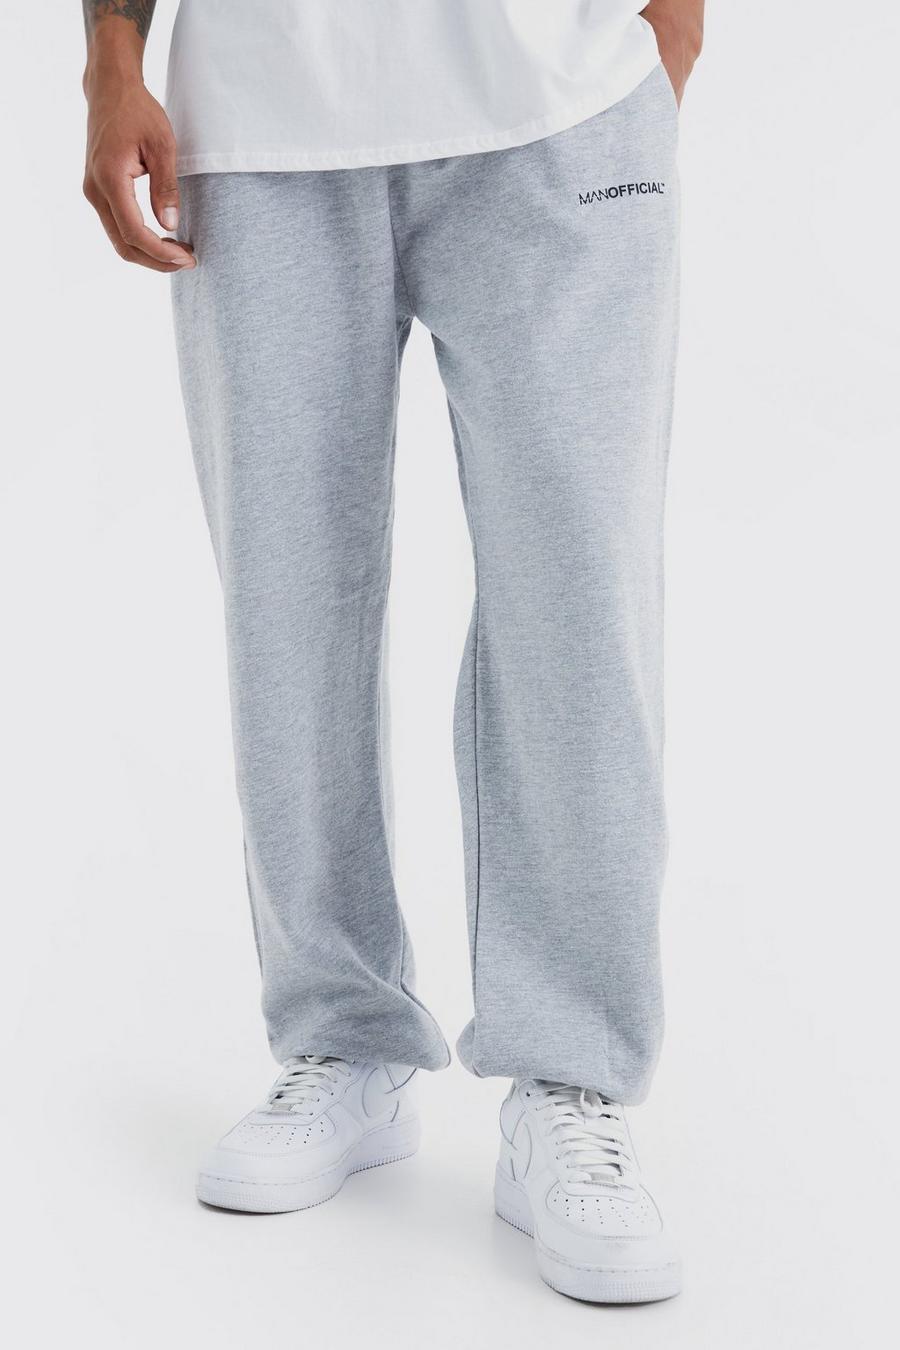 Grey Man Official Oversized Joggers